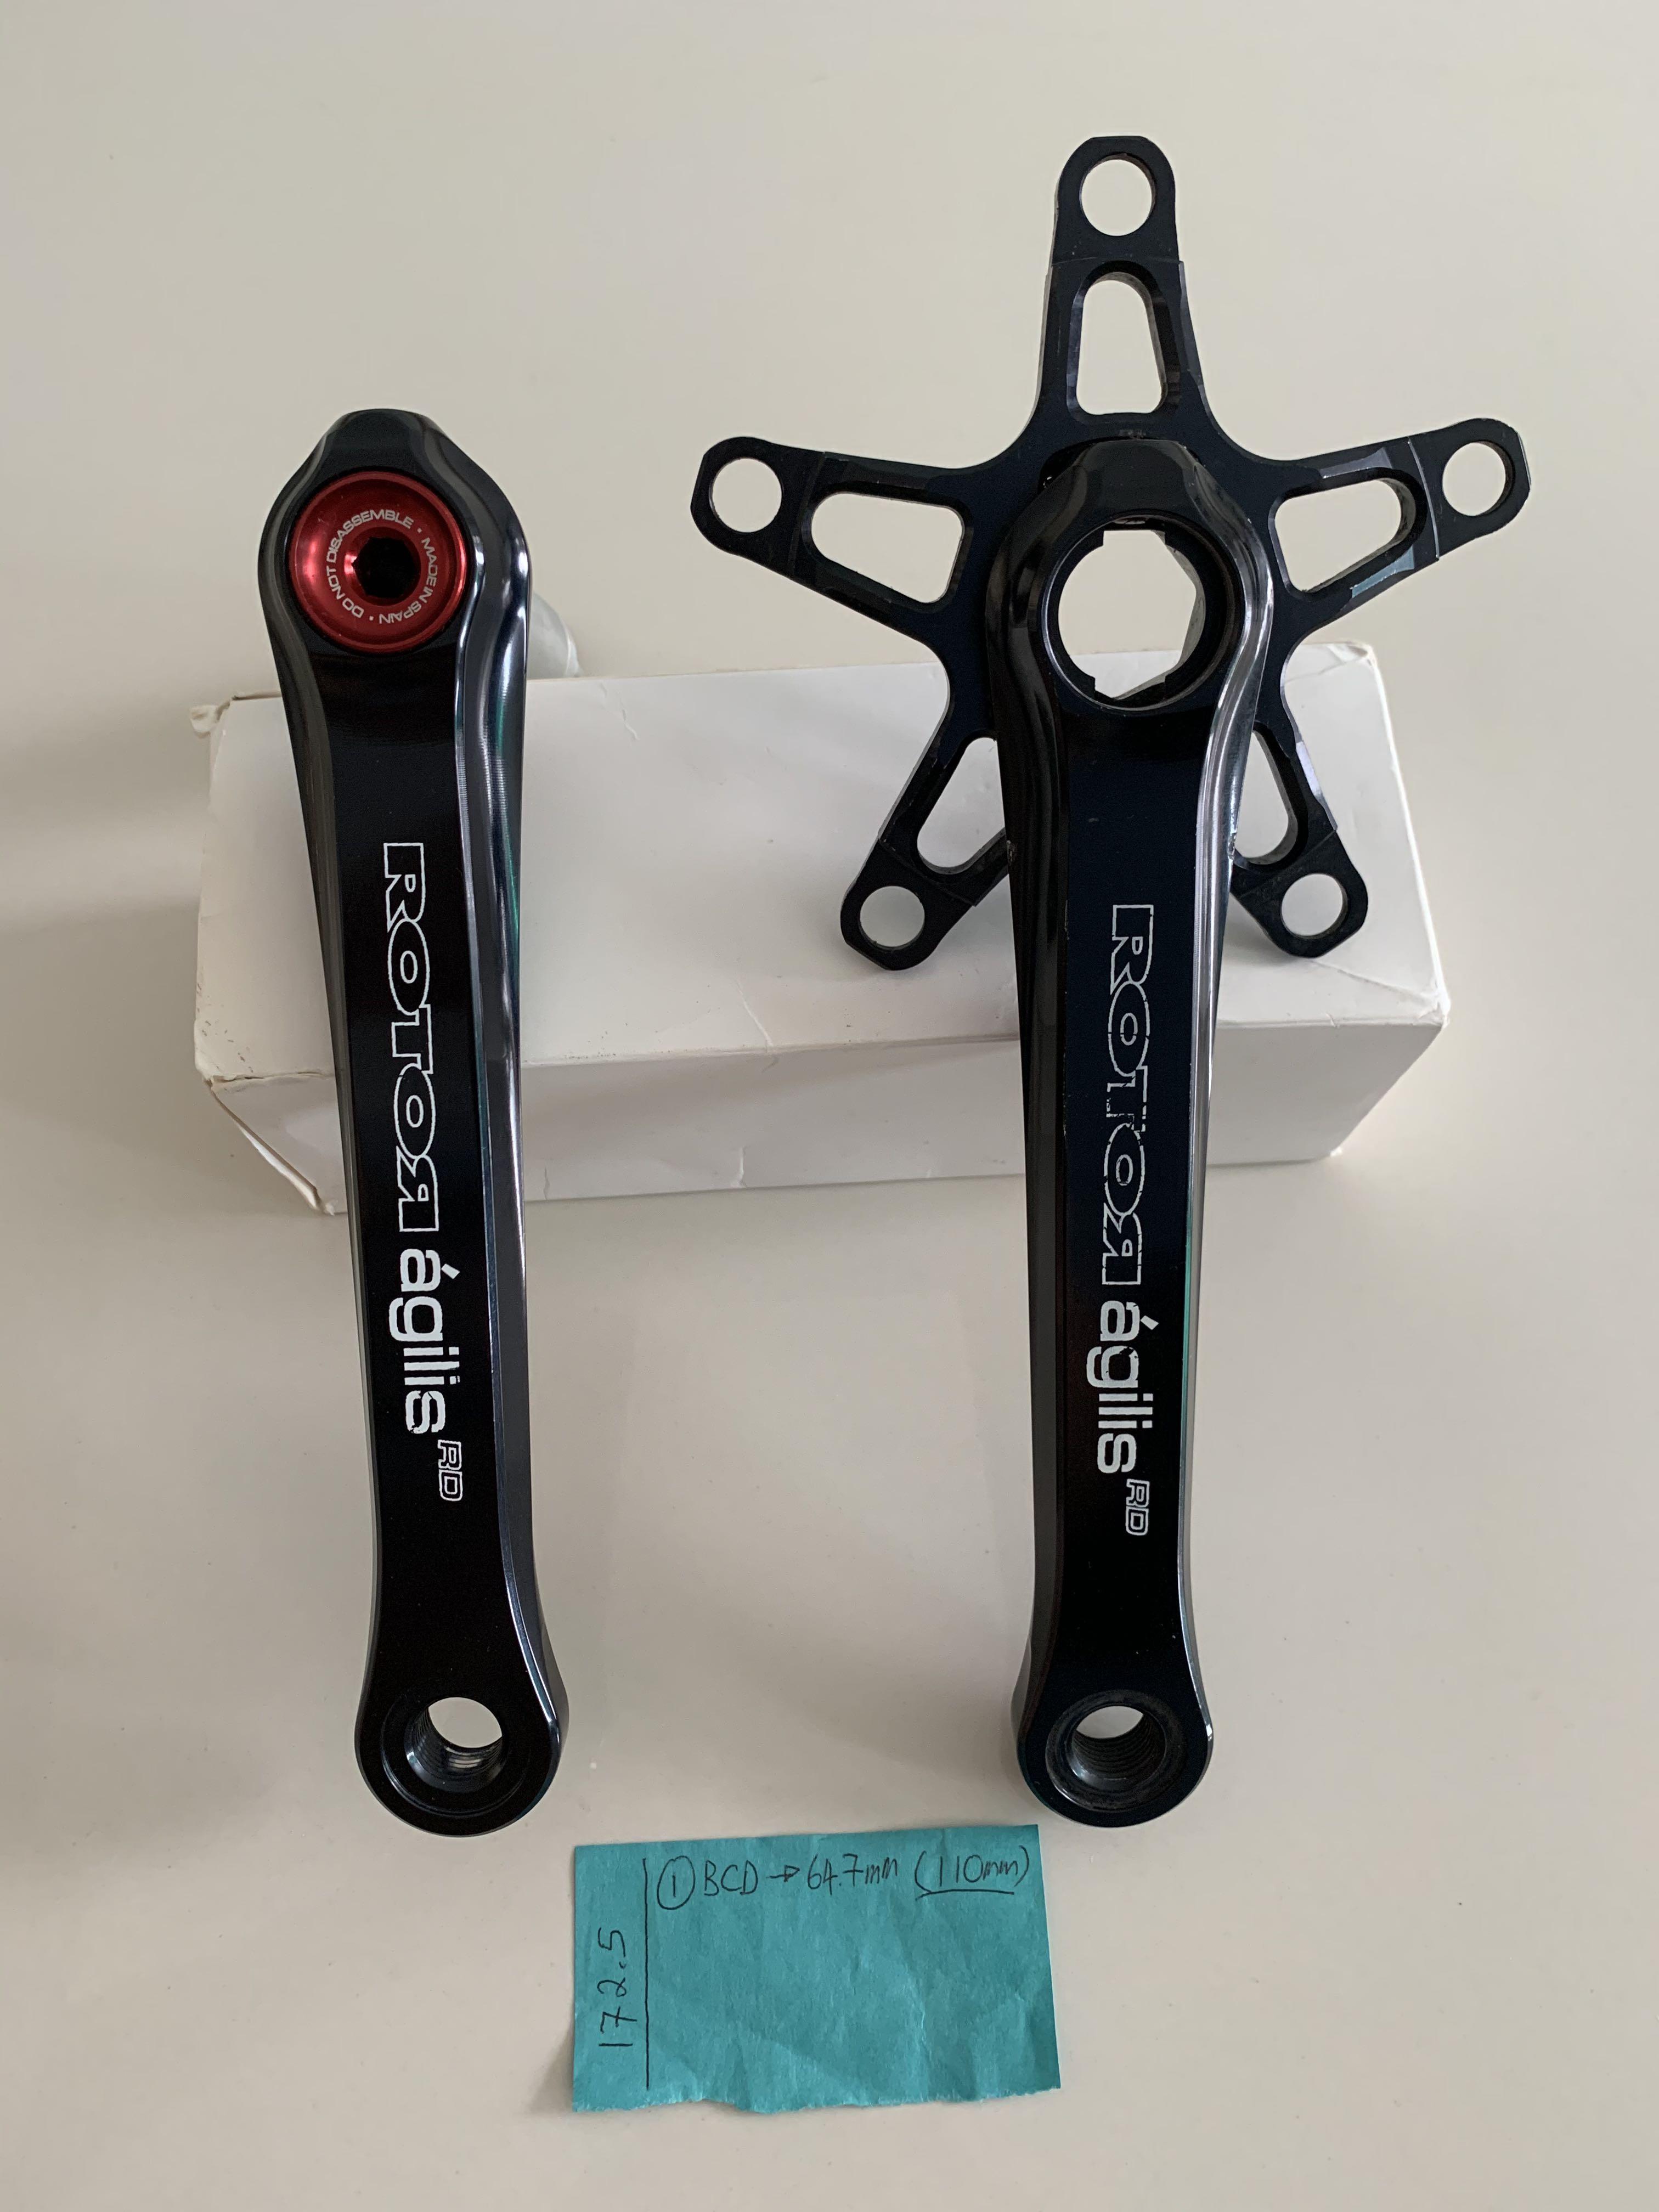 Rotor Agilis Crank 172.5mm (1 BCD110mm left) and 170mm (sold)